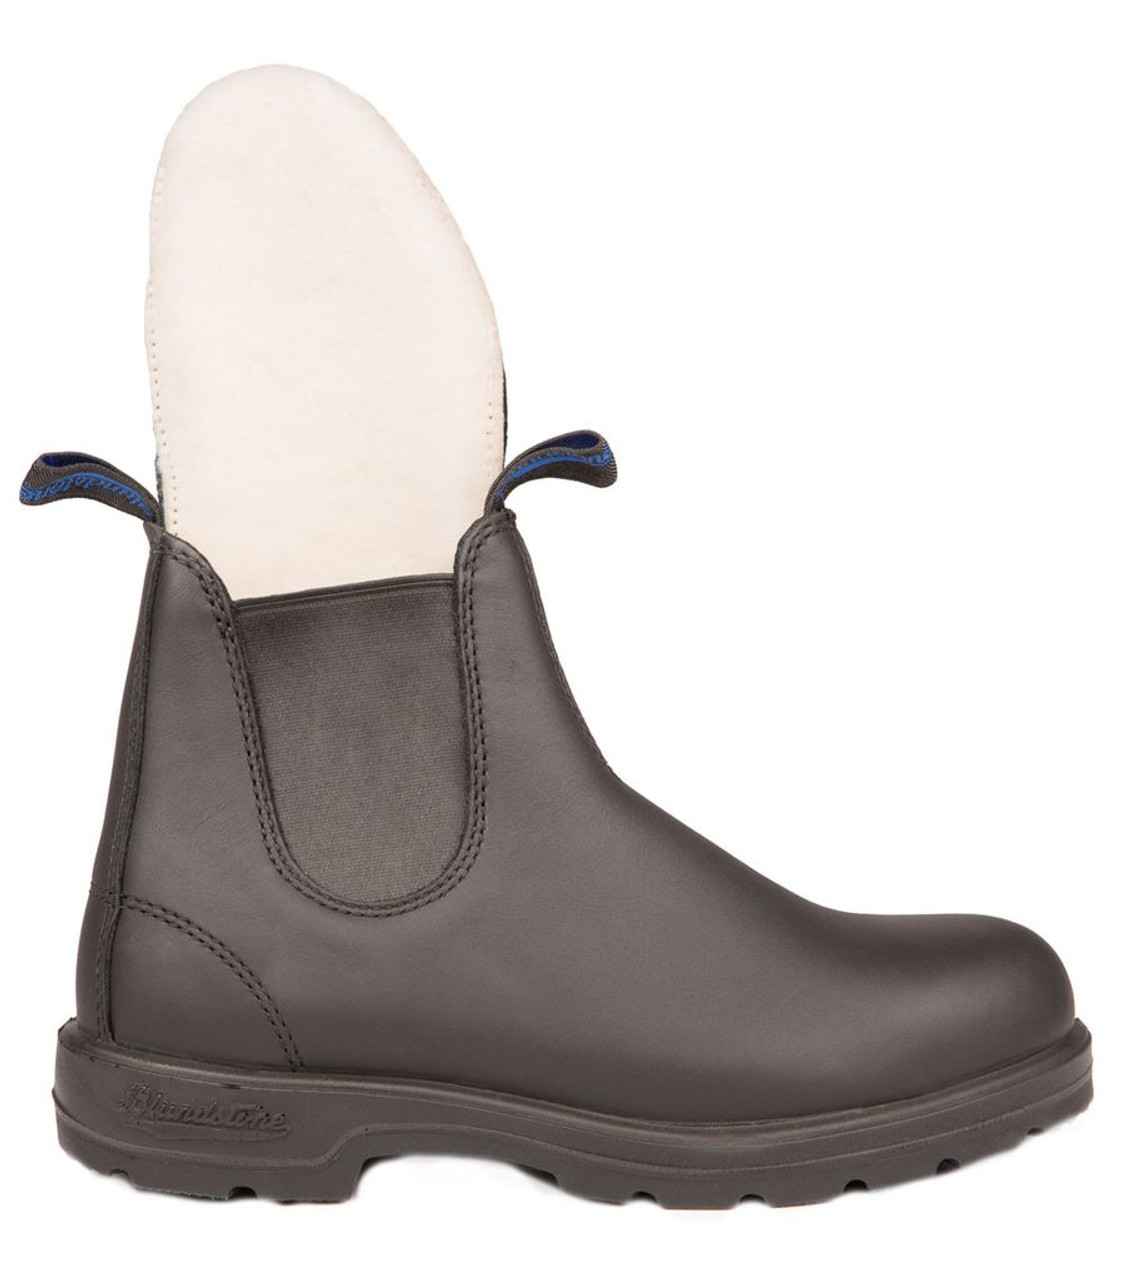 winter insoles for blundstones